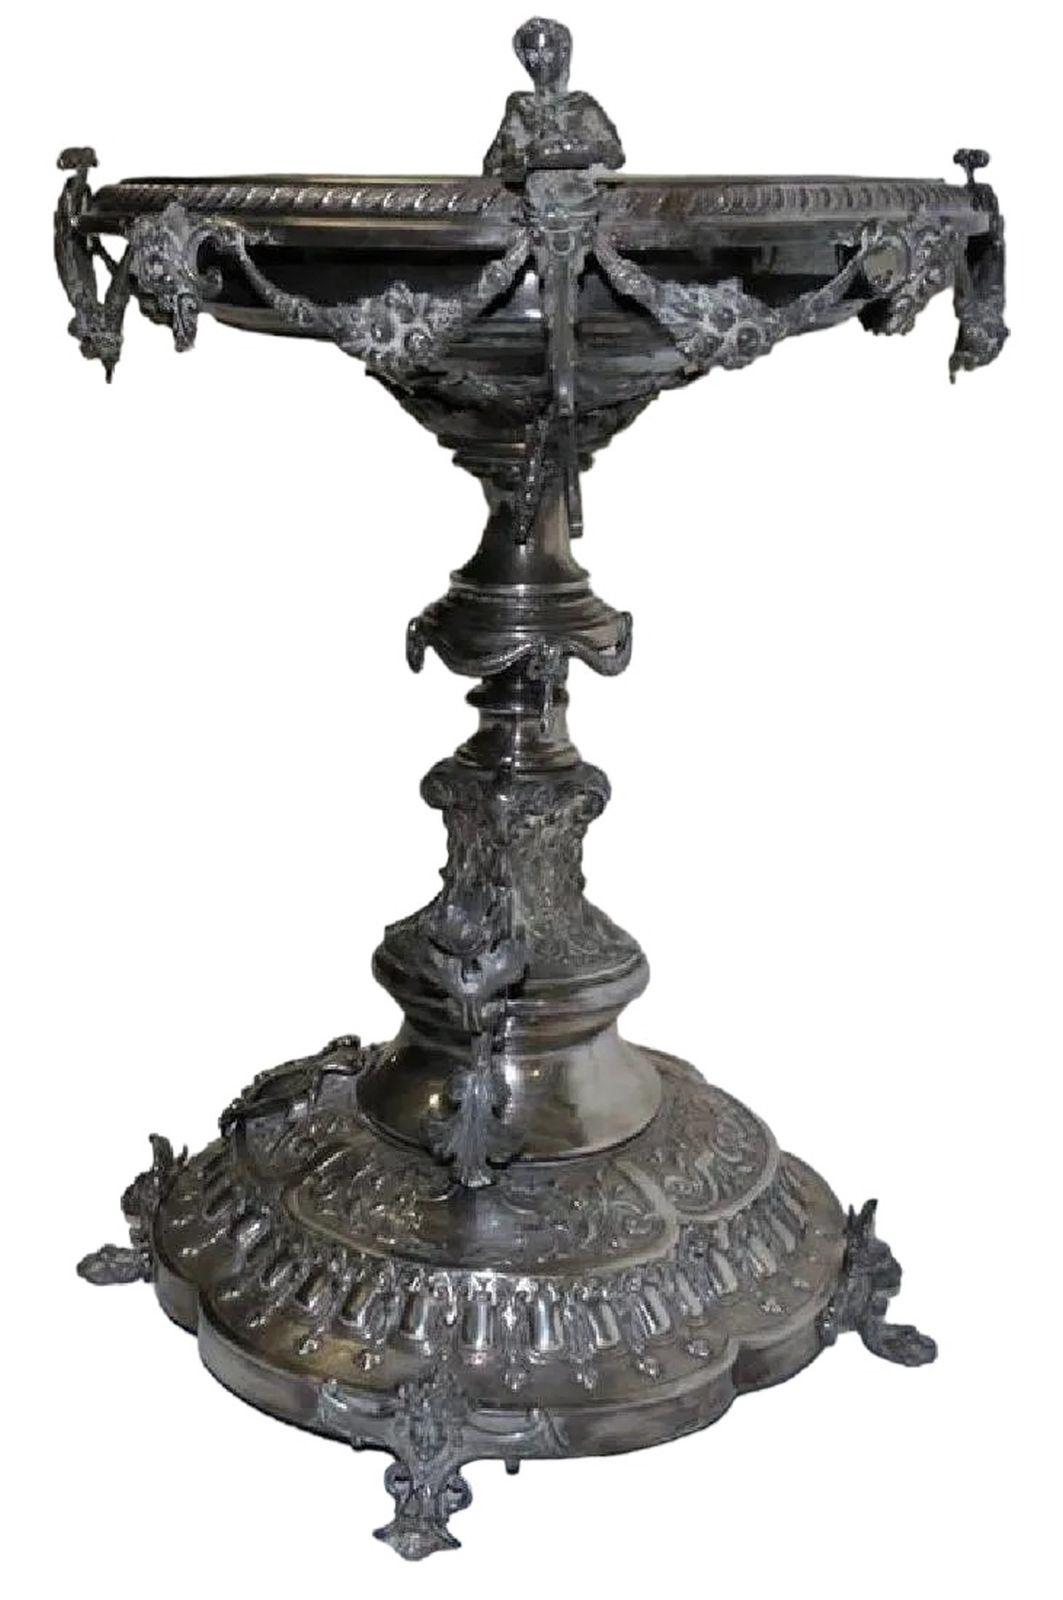 This large and monumental 19th century English centerpiece is bronze covered in silver. The hand done details are finely crafted for an elegant and fabulous look.